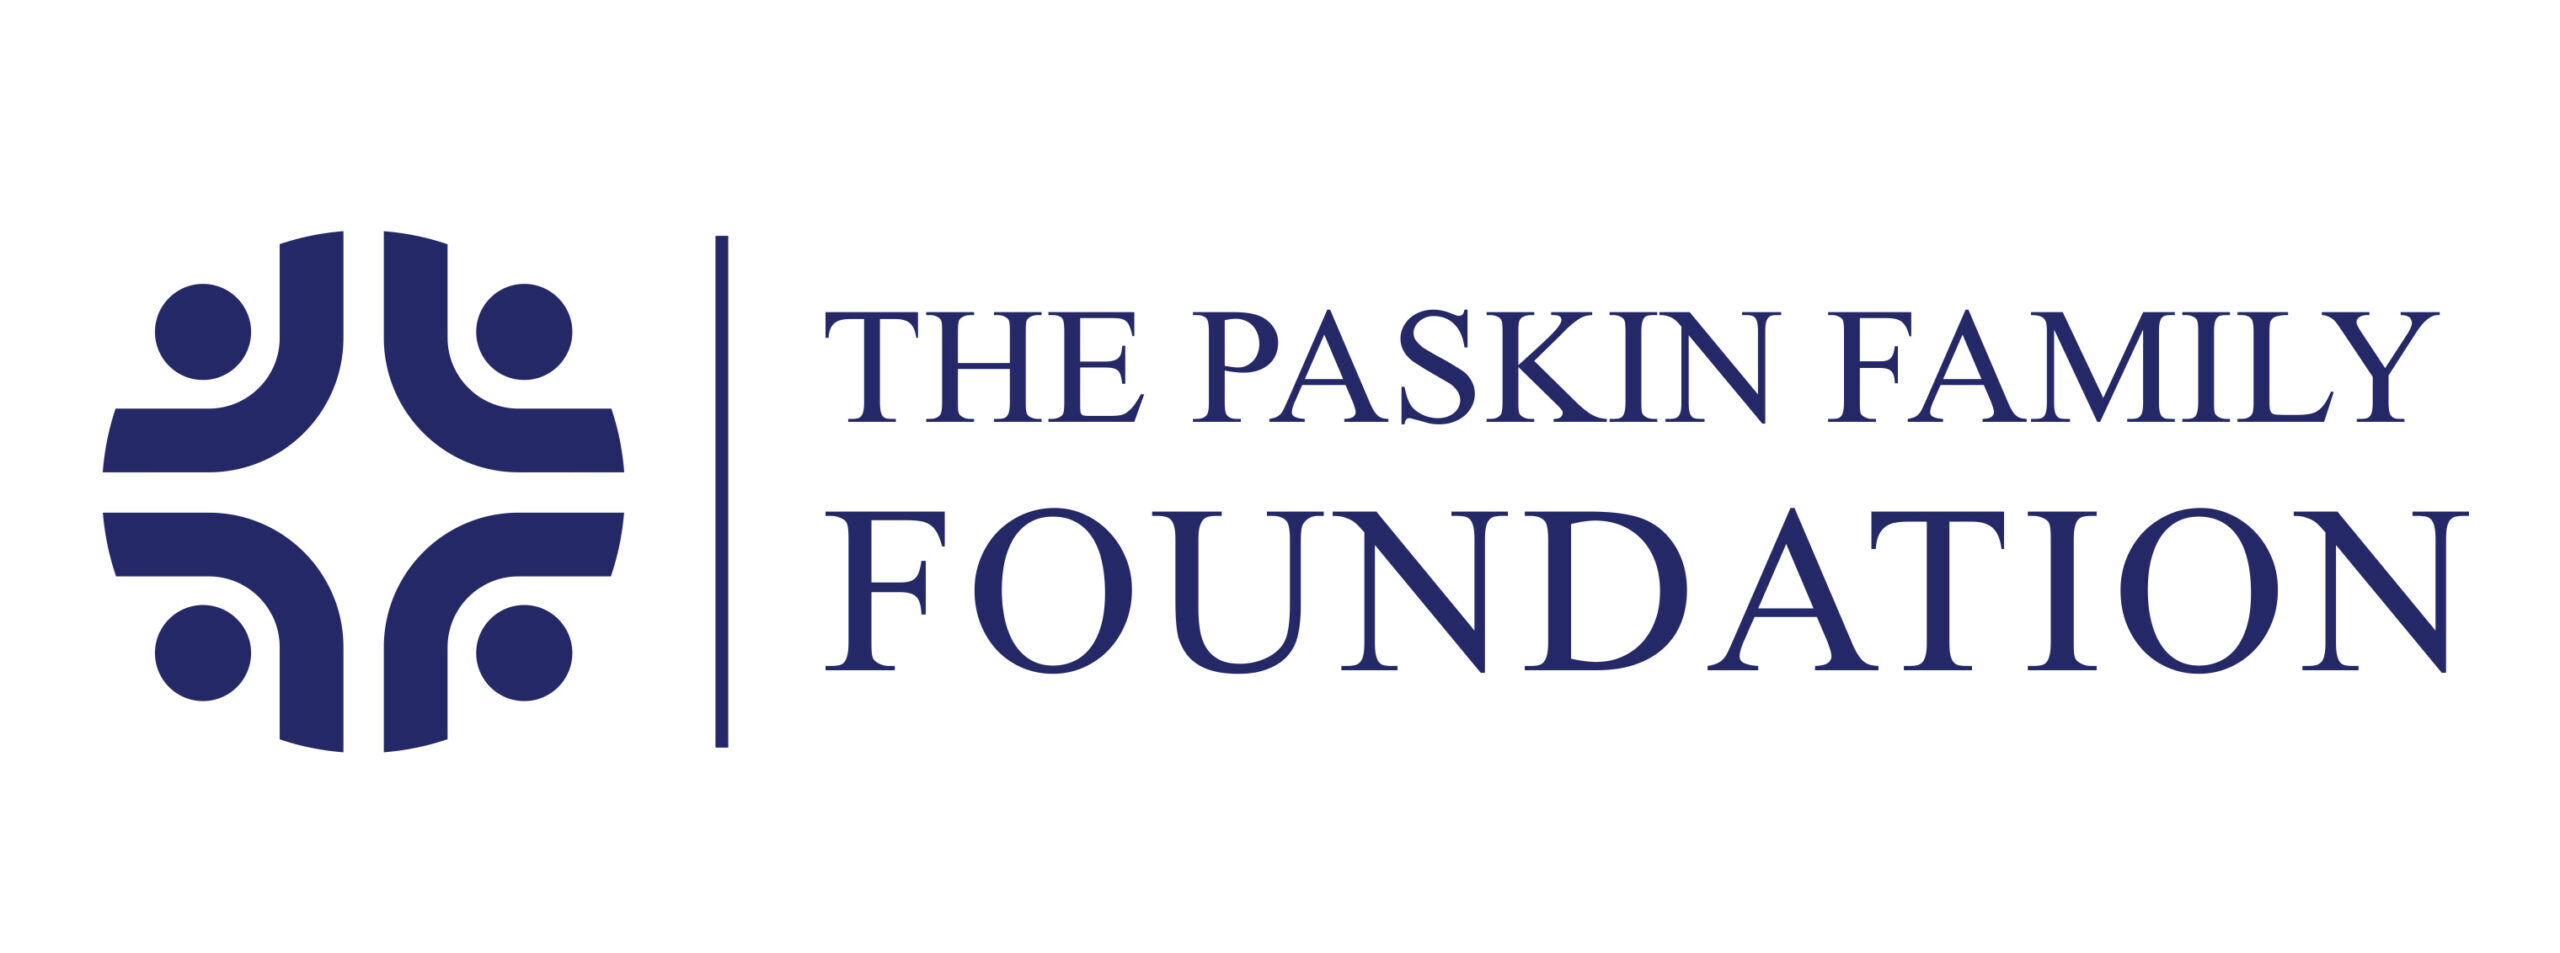 The Paskin Family Foundation